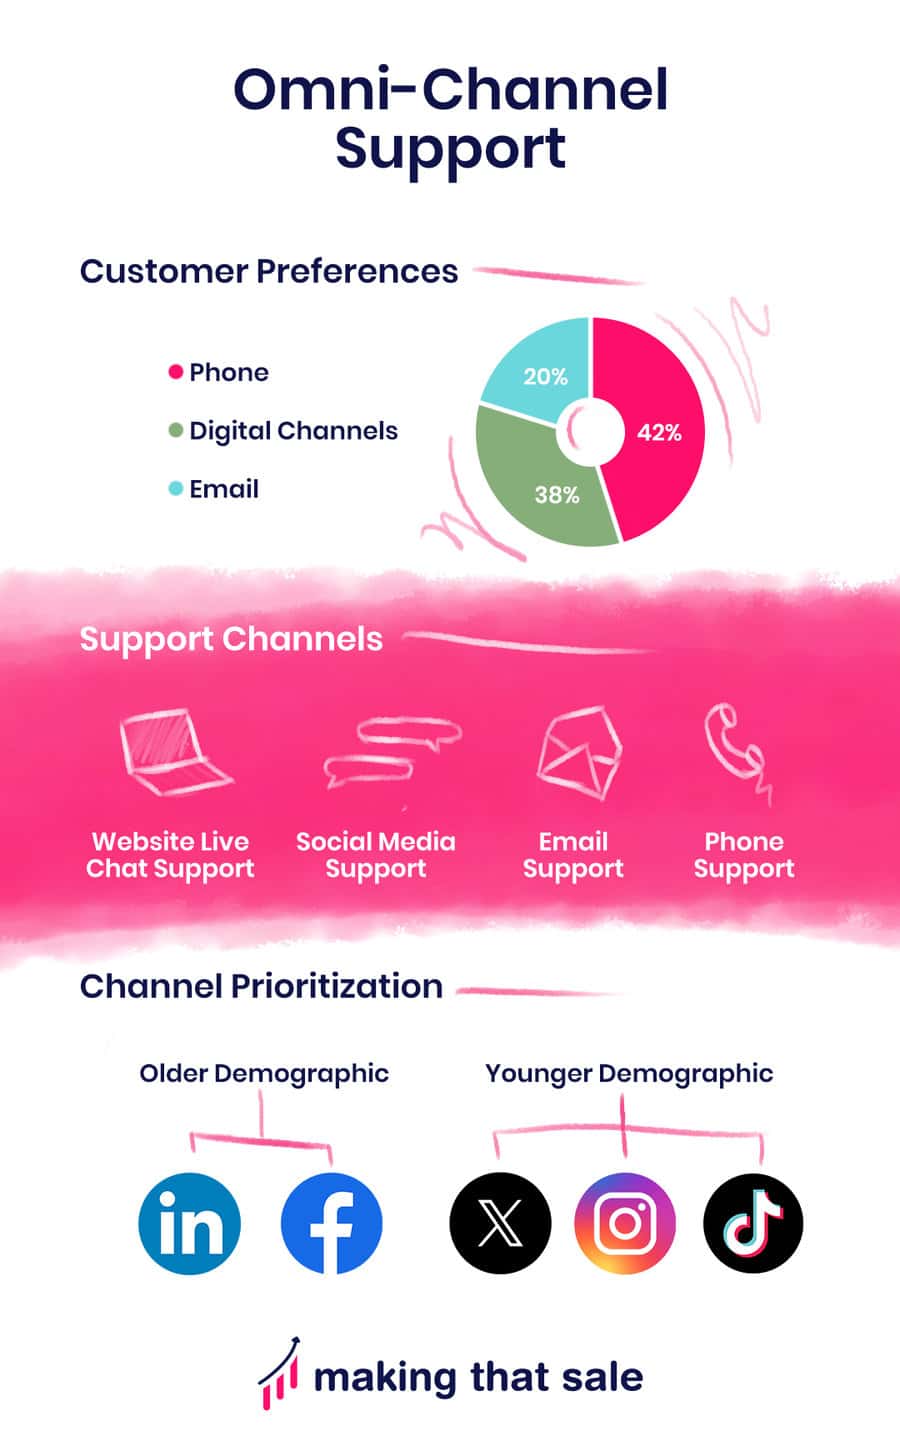 Omni-Channel Support Infographic